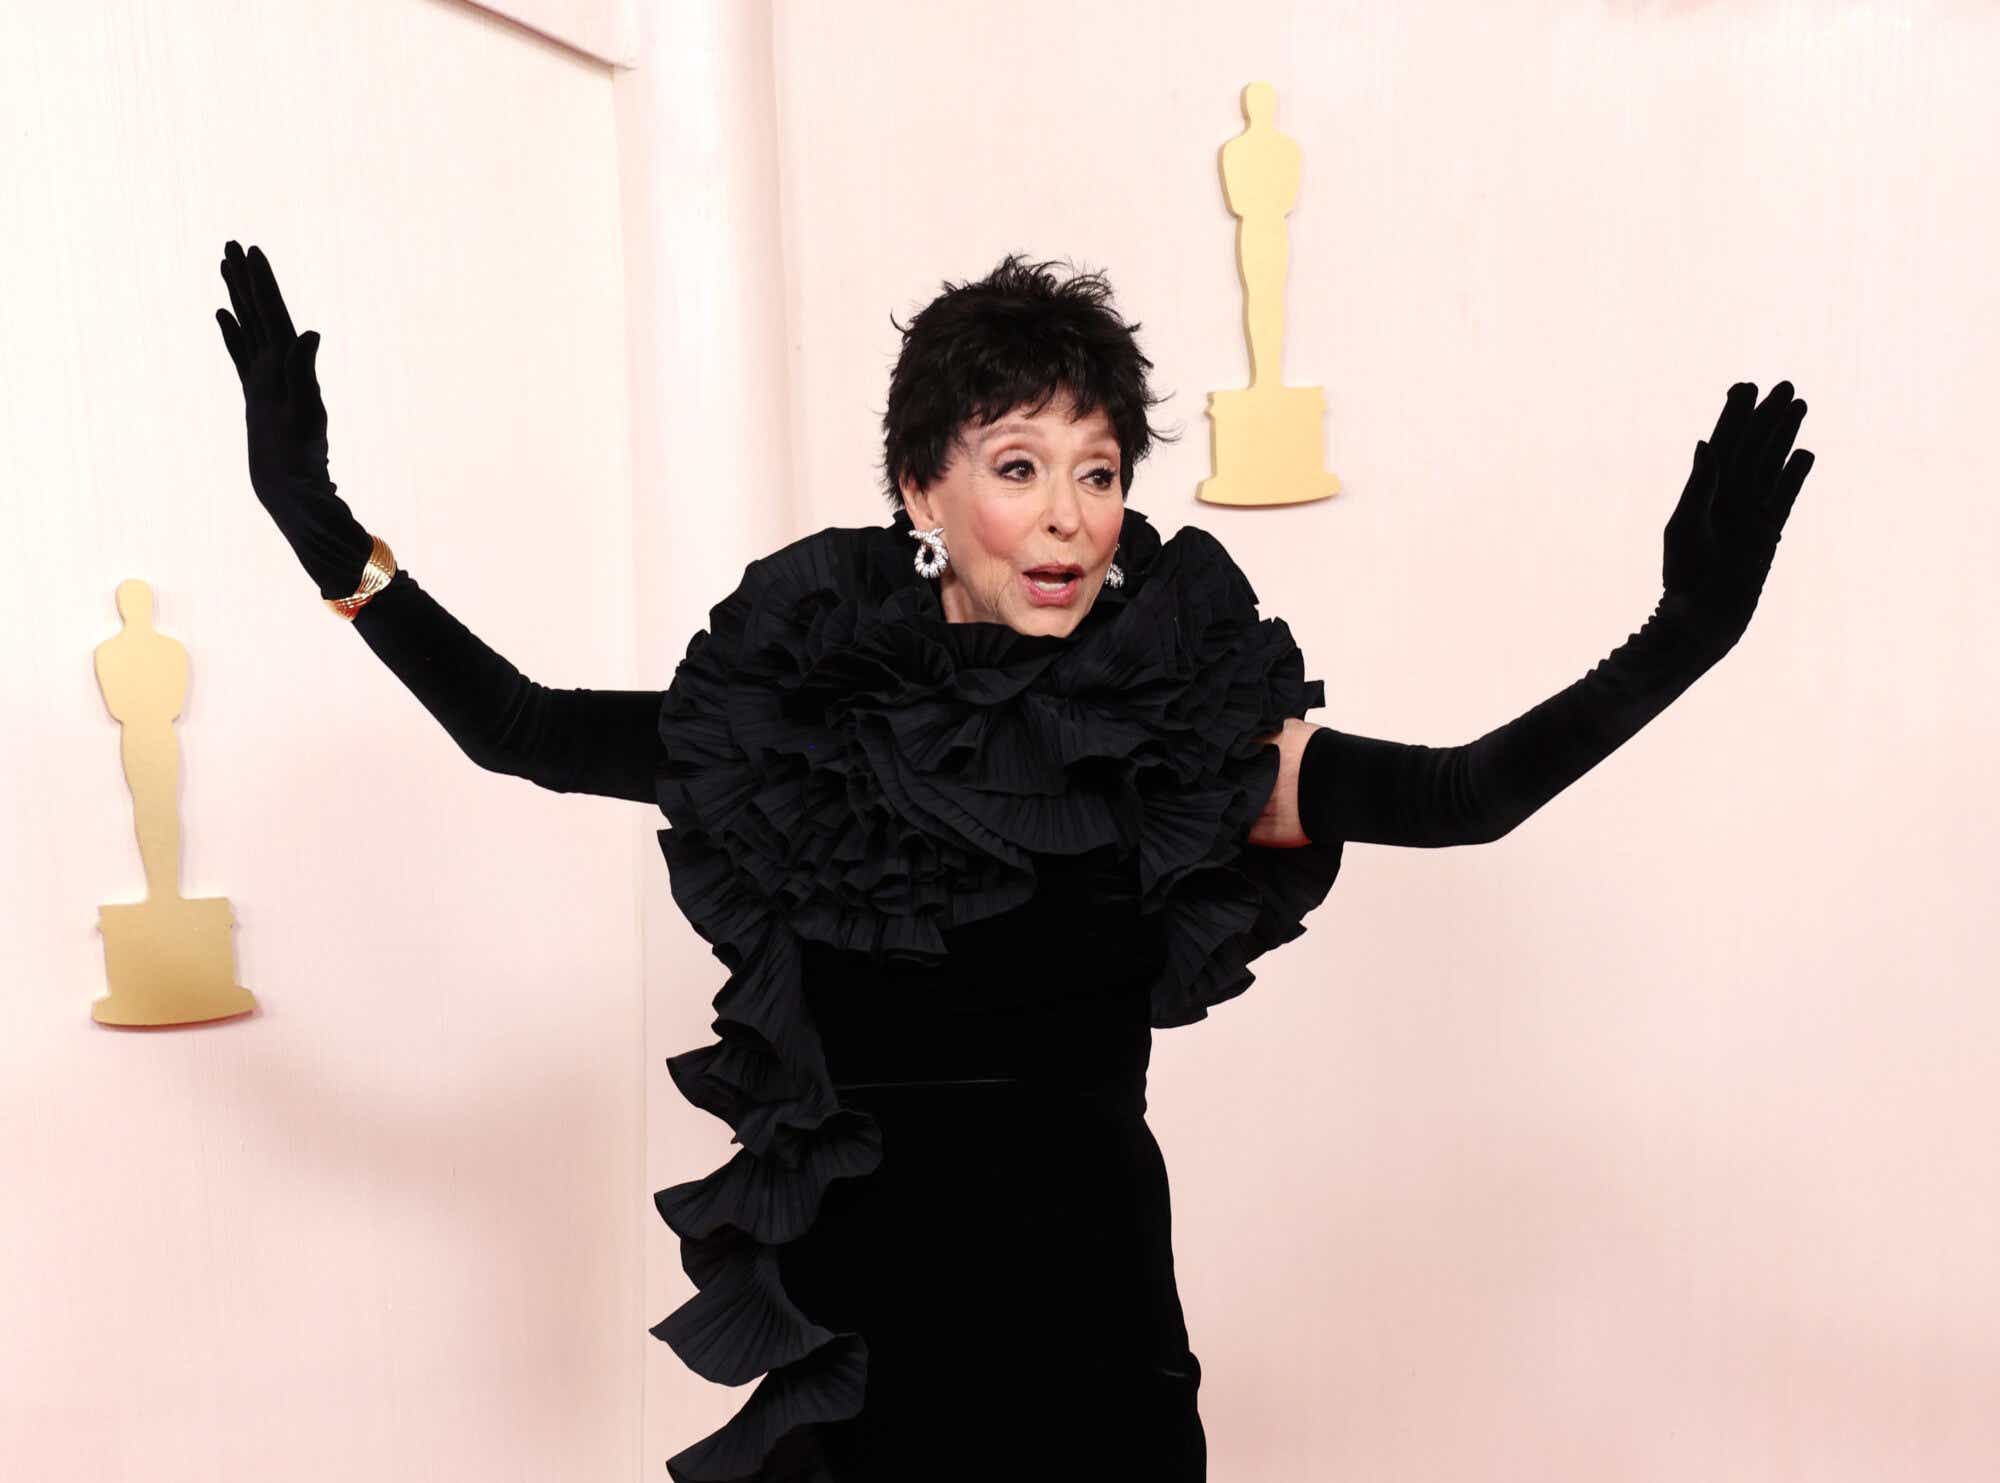 Rita Moreno attends the Oscars wearing a black town with ruffling around her shoulders and down the side and matching black gloves.